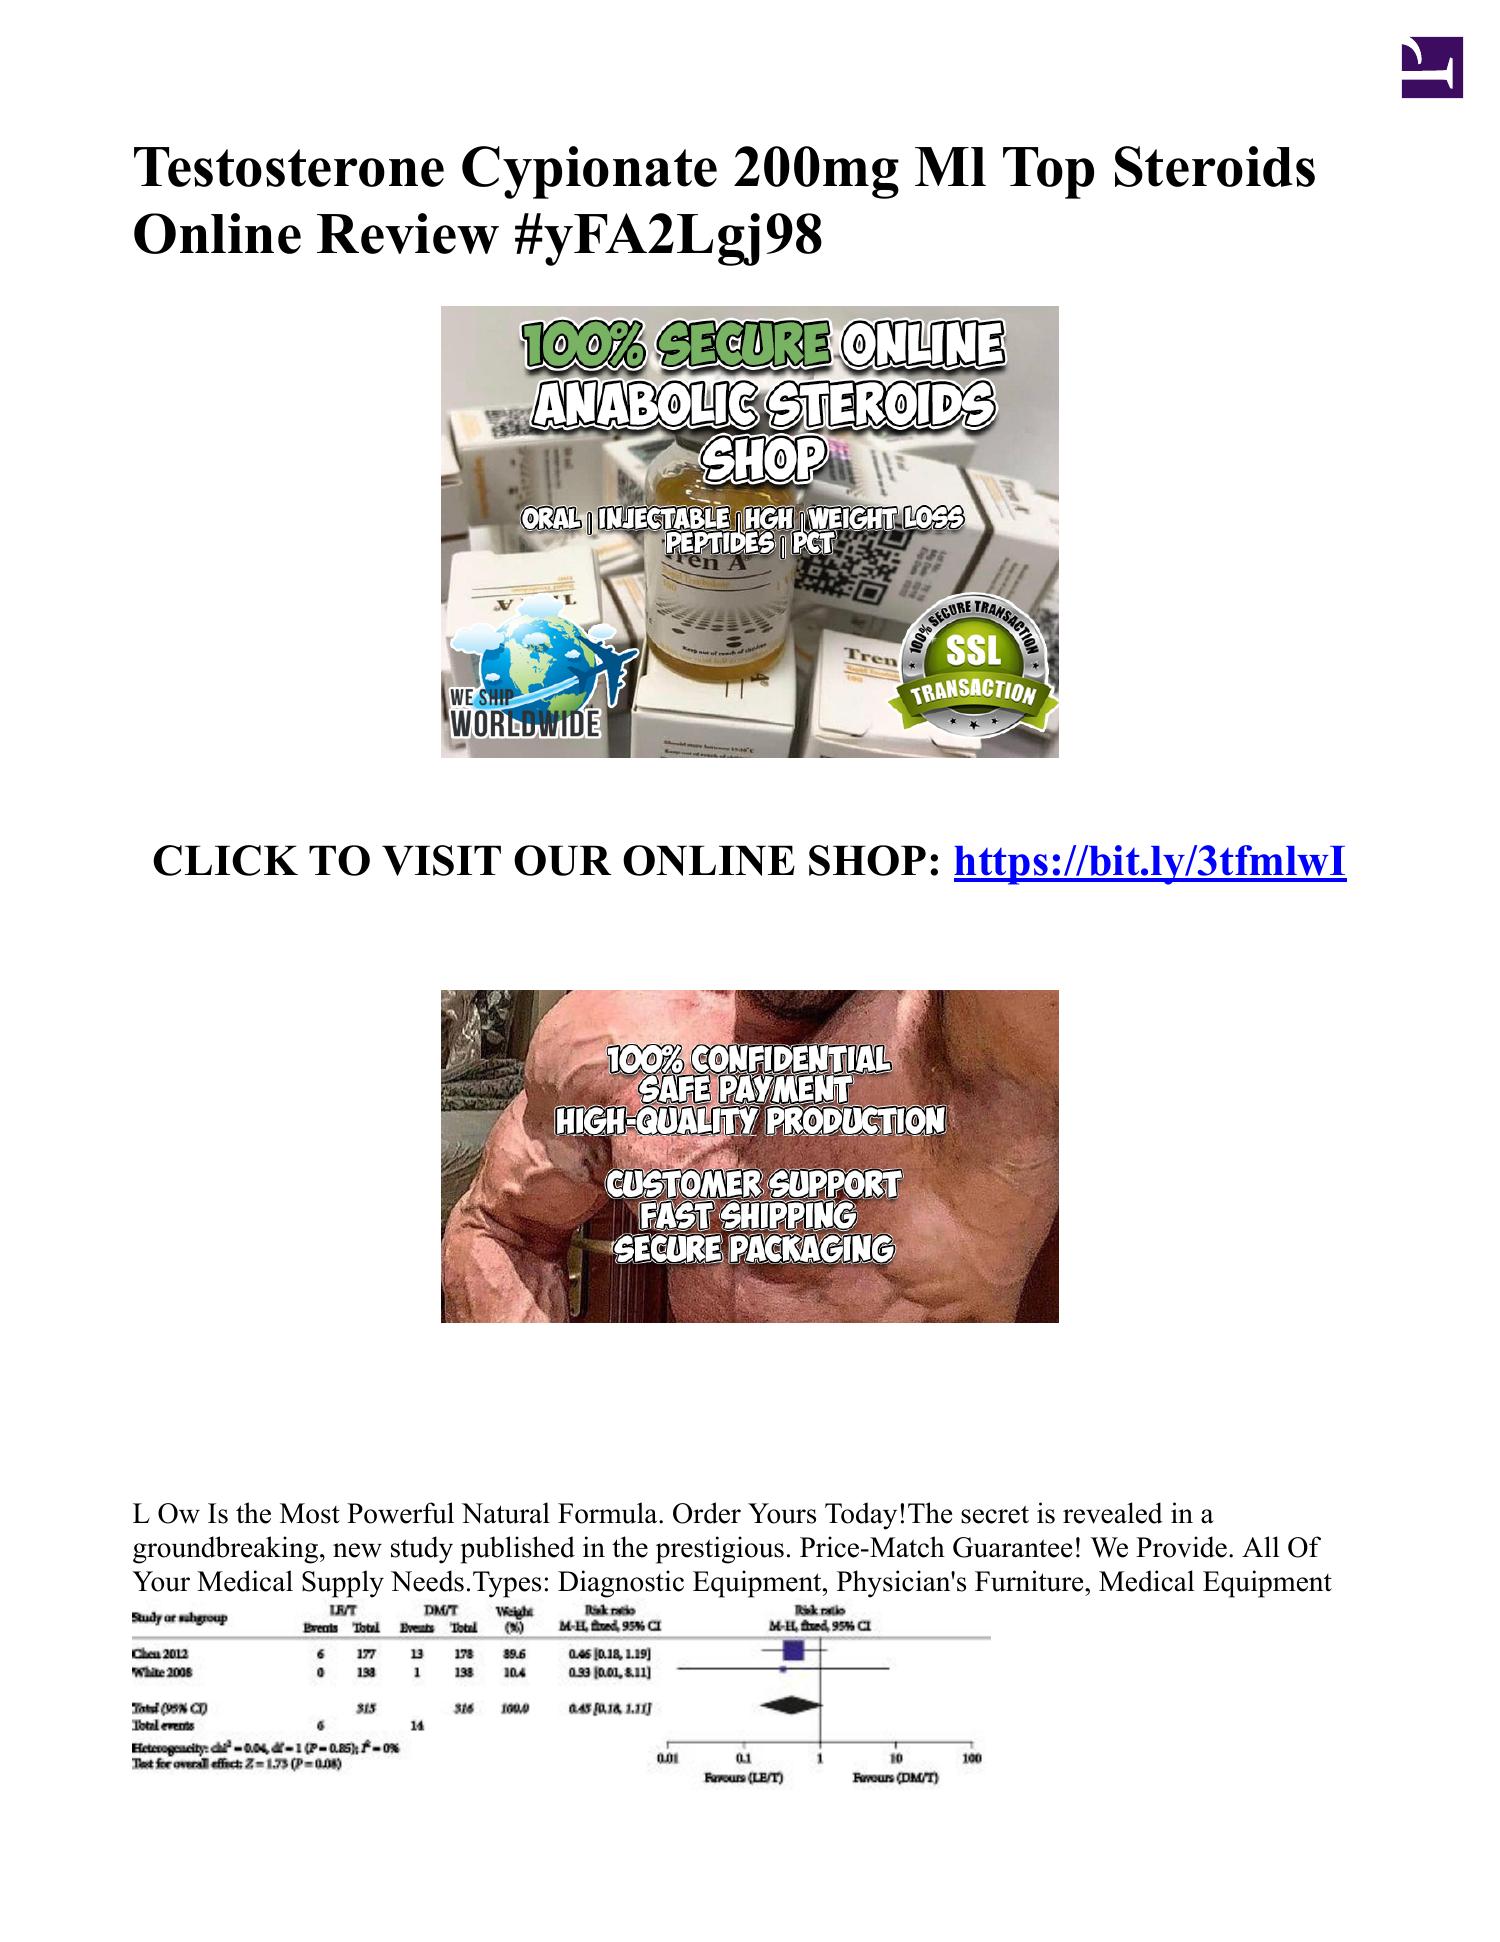 Testosterone Top Steroids Online Review.pdf | DocDroid